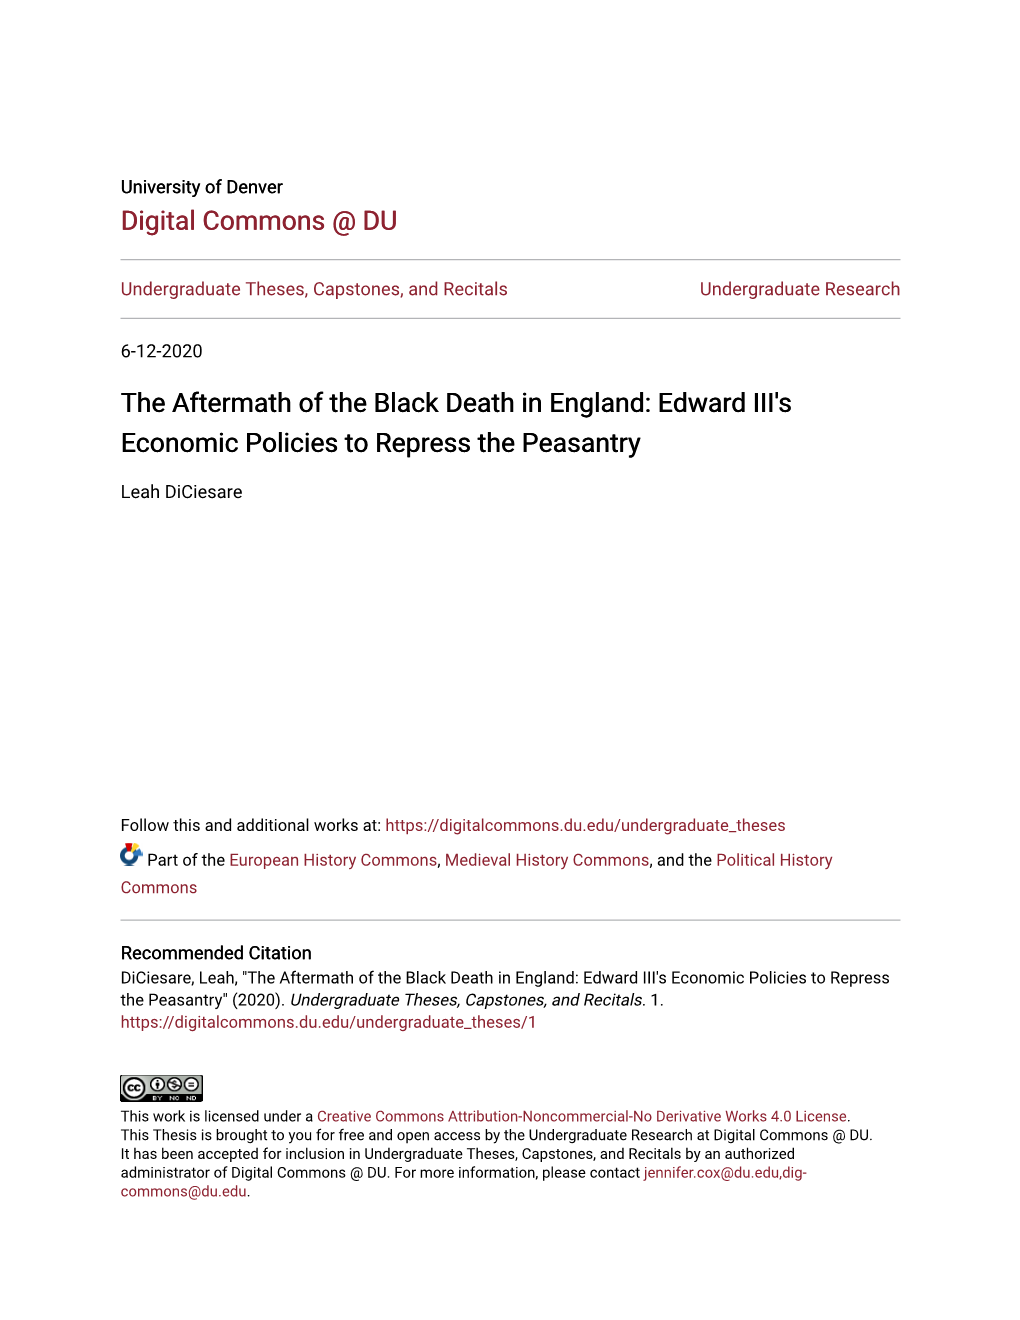 The Aftermath of the Black Death in England: Edward III's Economic Policies to Repress the Peasantry